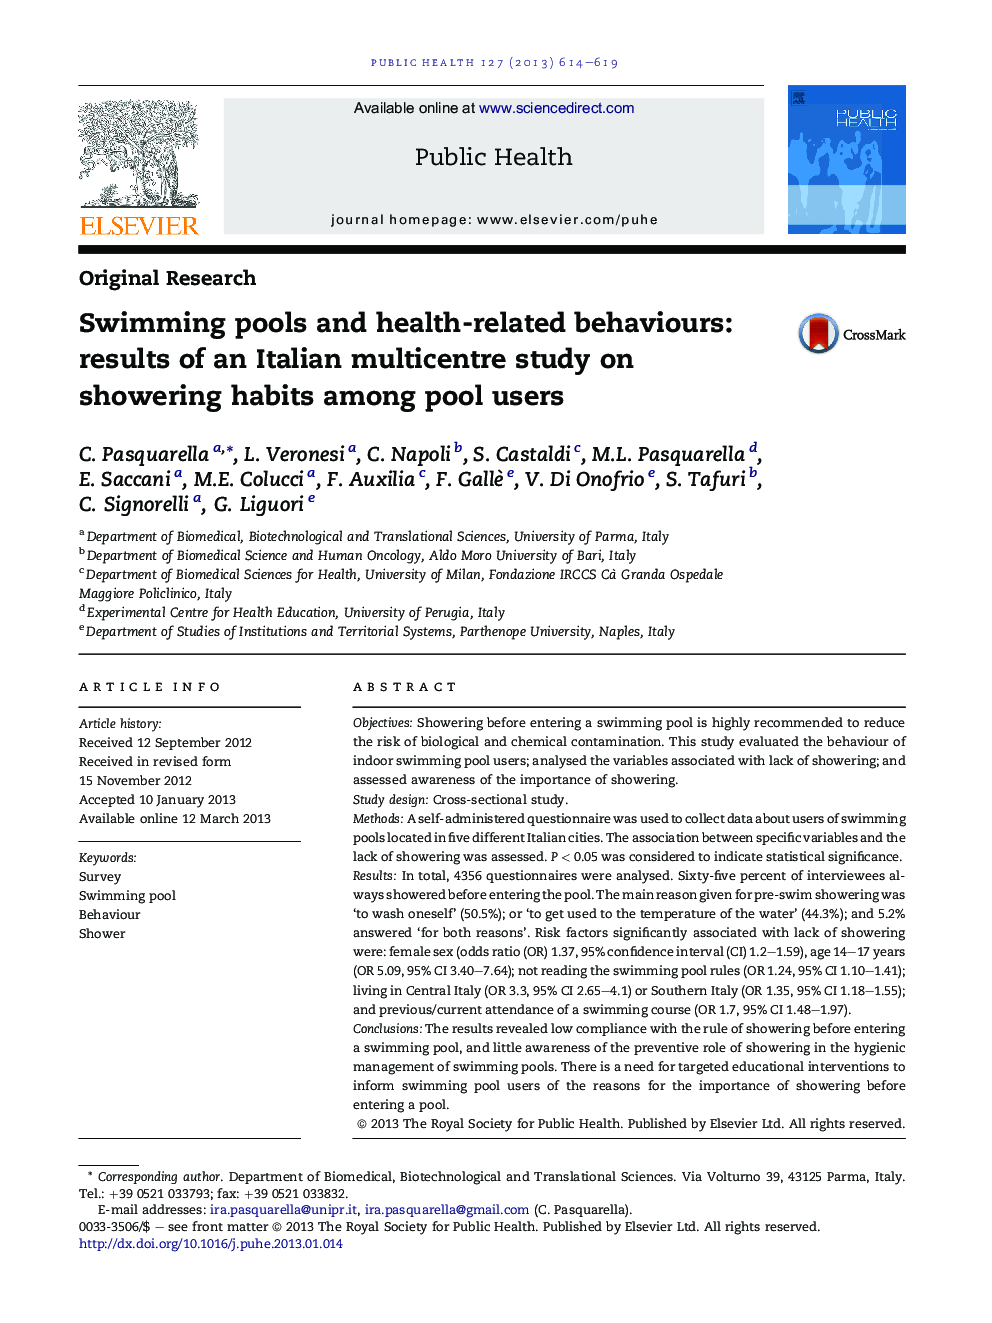 Swimming pools and health-related behaviours: results of an Italian multicentre study on showering habits among pool users